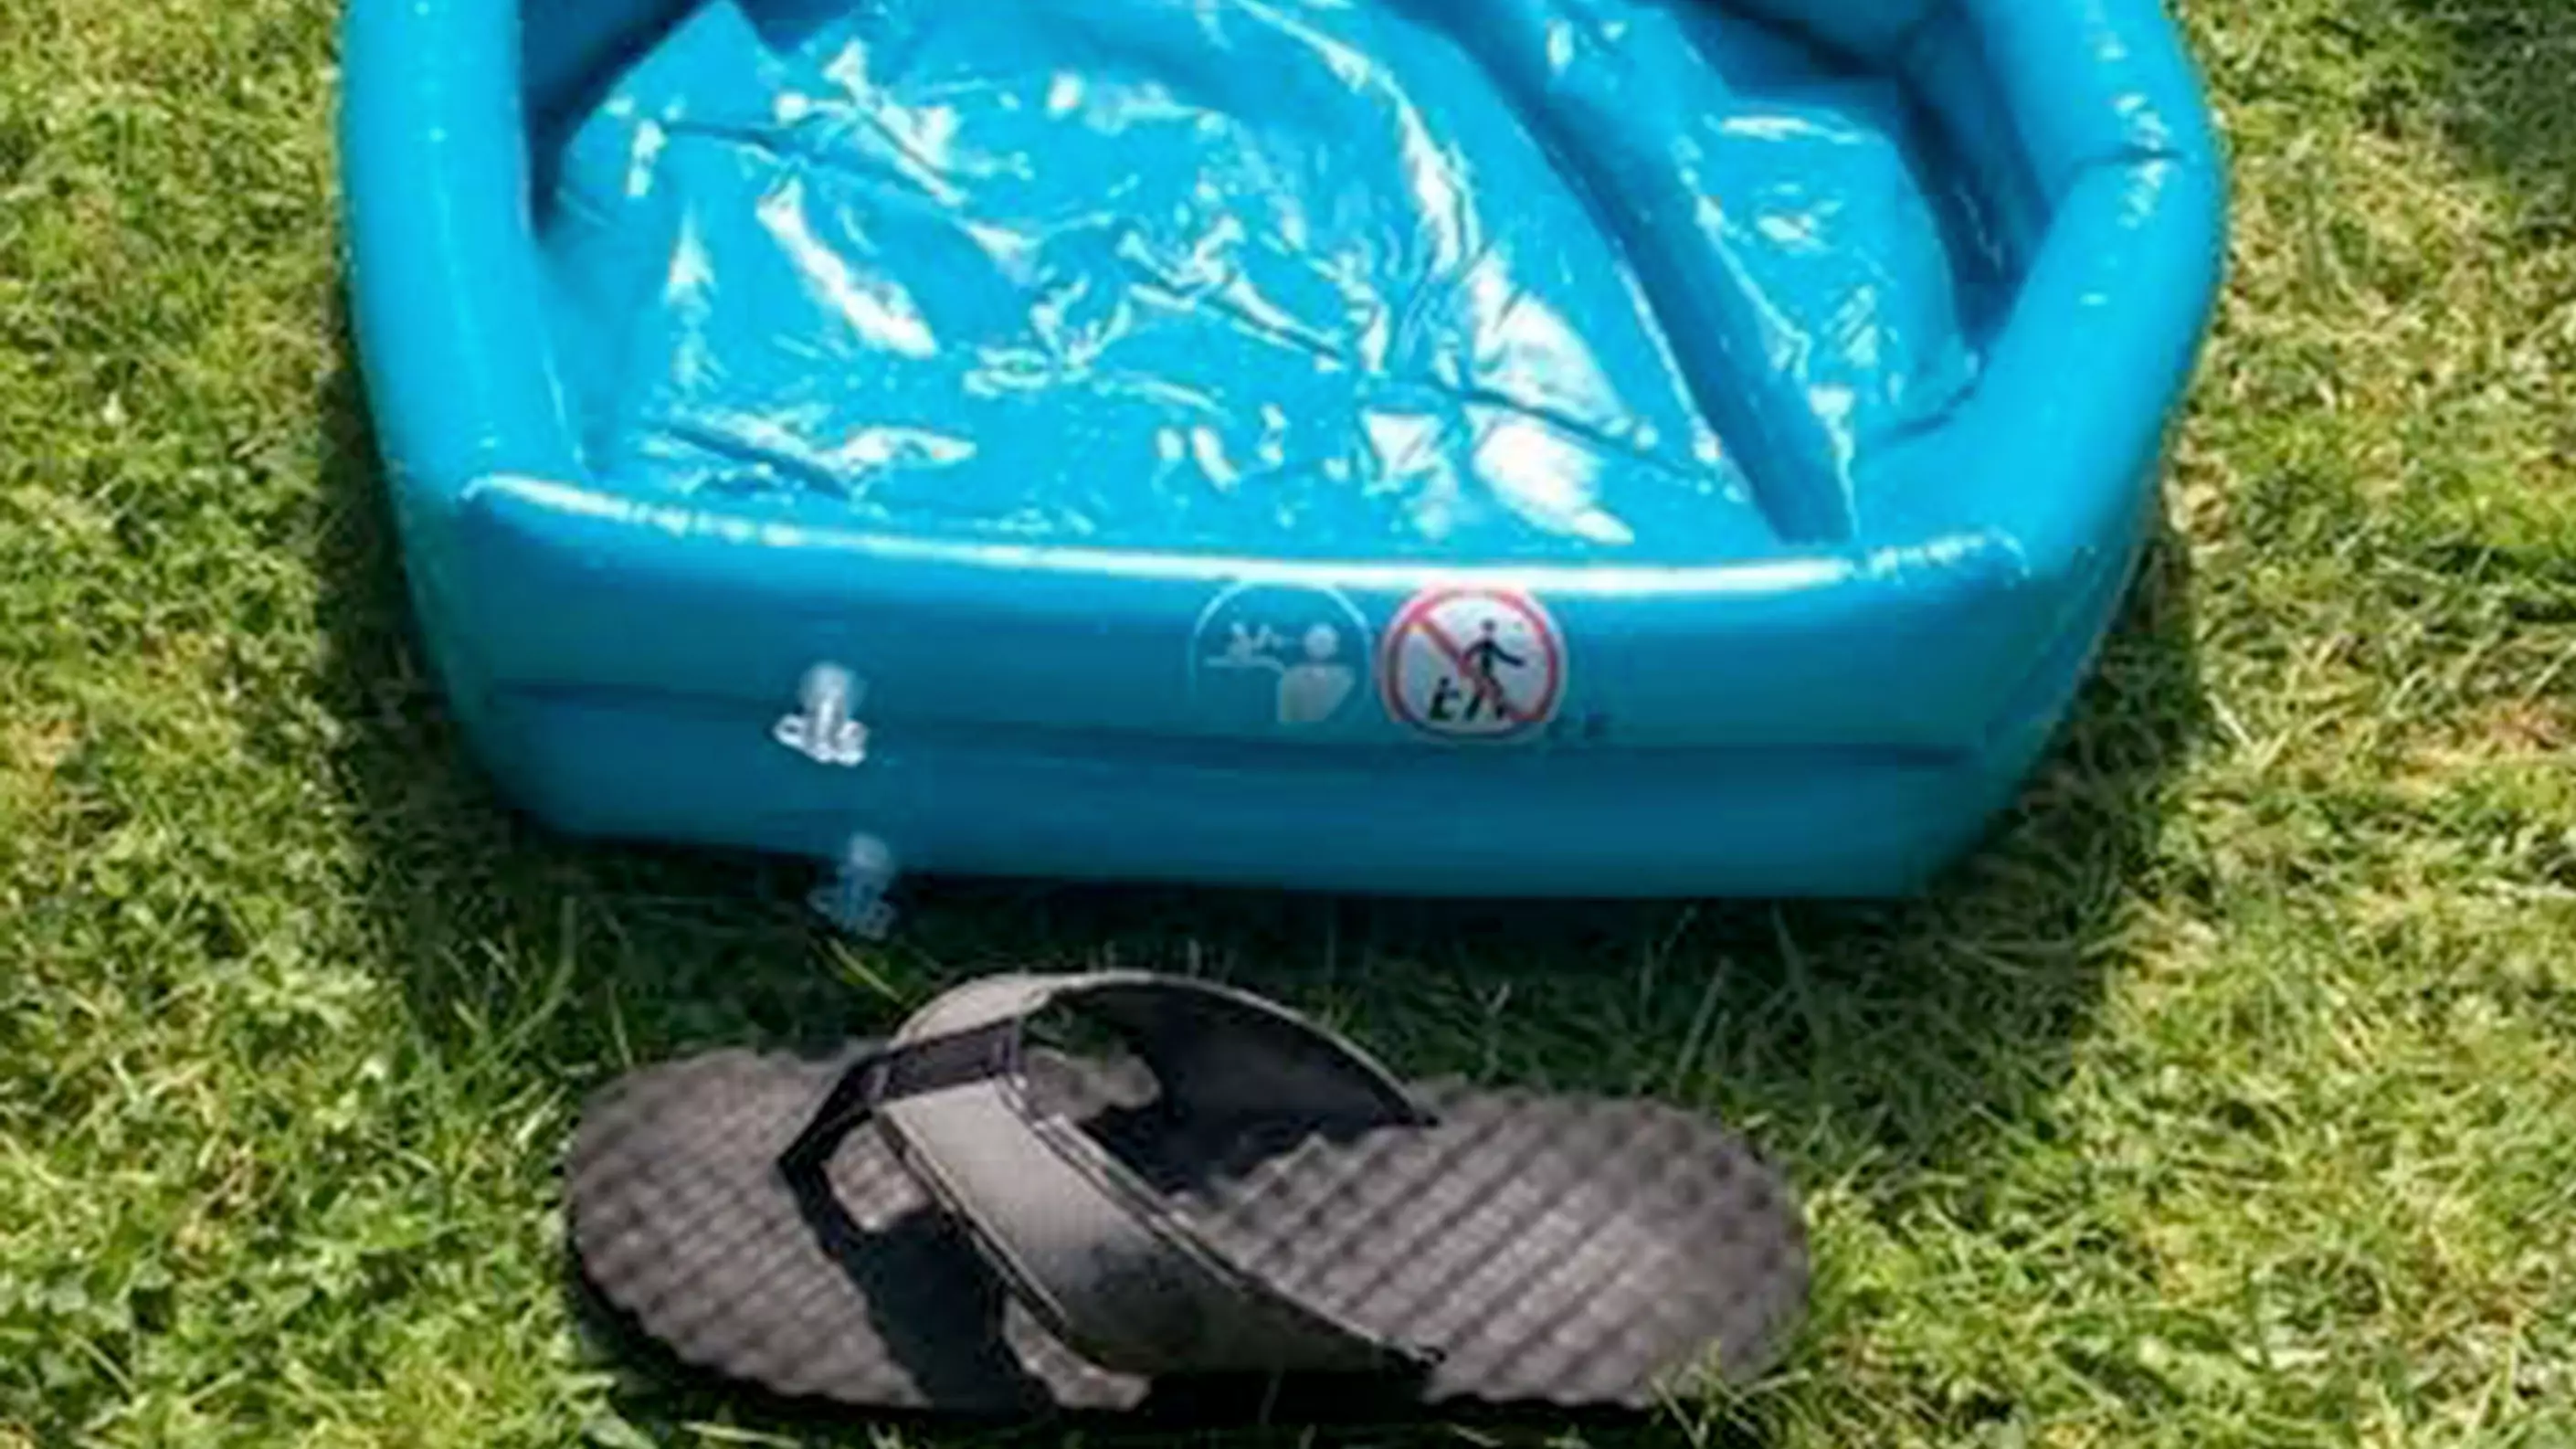 Mum Accidentally Buys Paddling Pool The Length Of Her Shoe